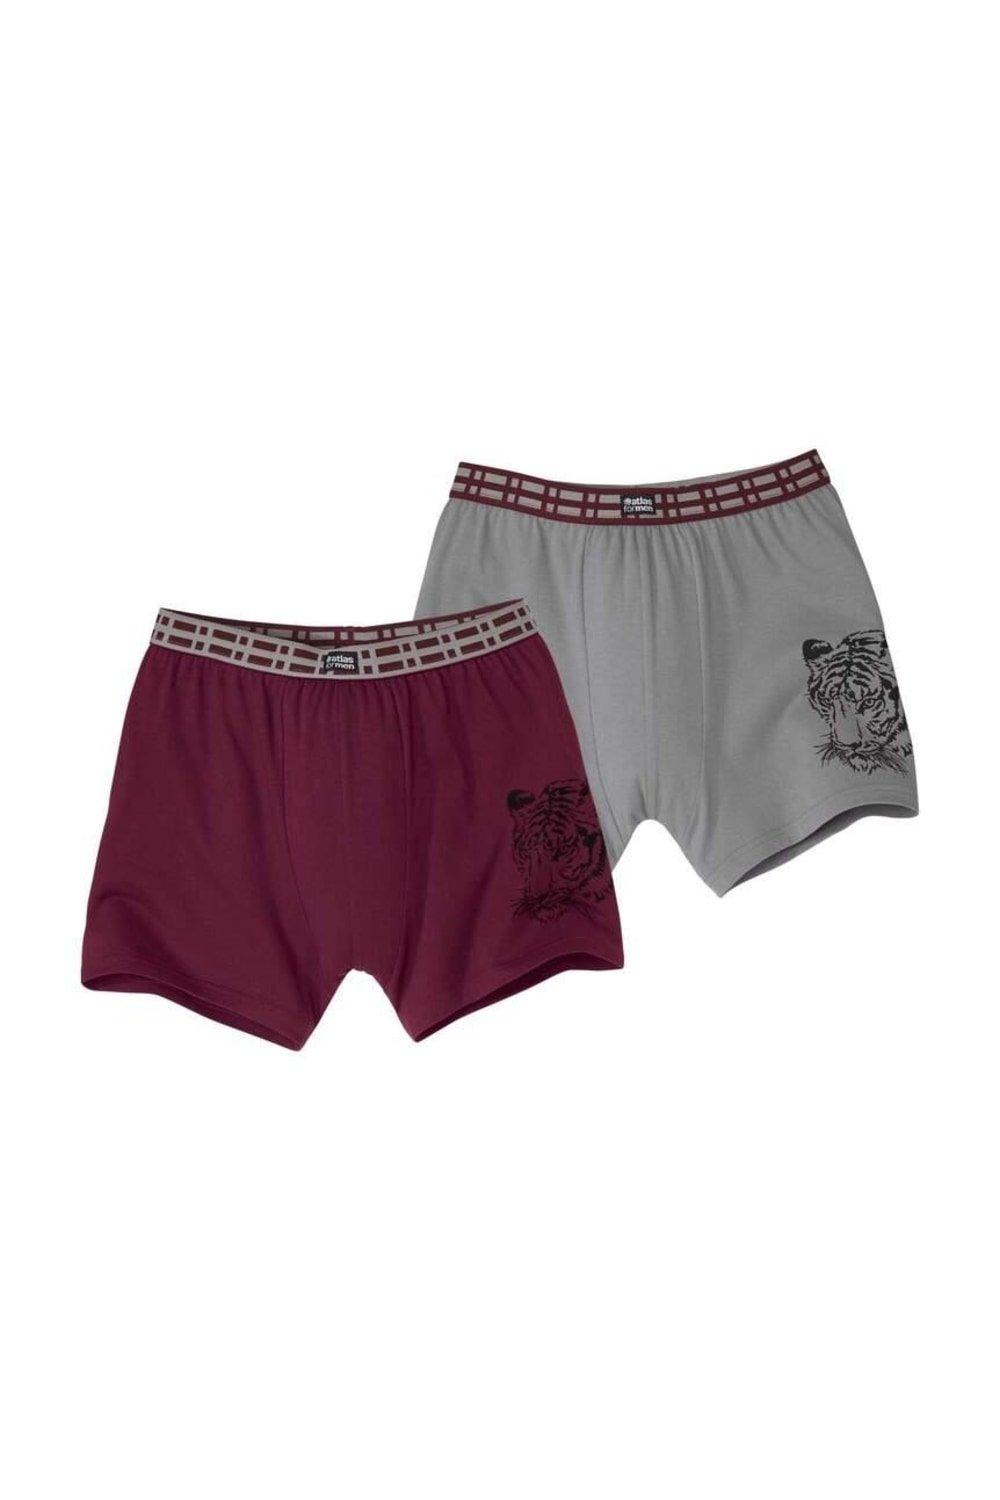 Stretch Boxer Shorts (Pack of 2)